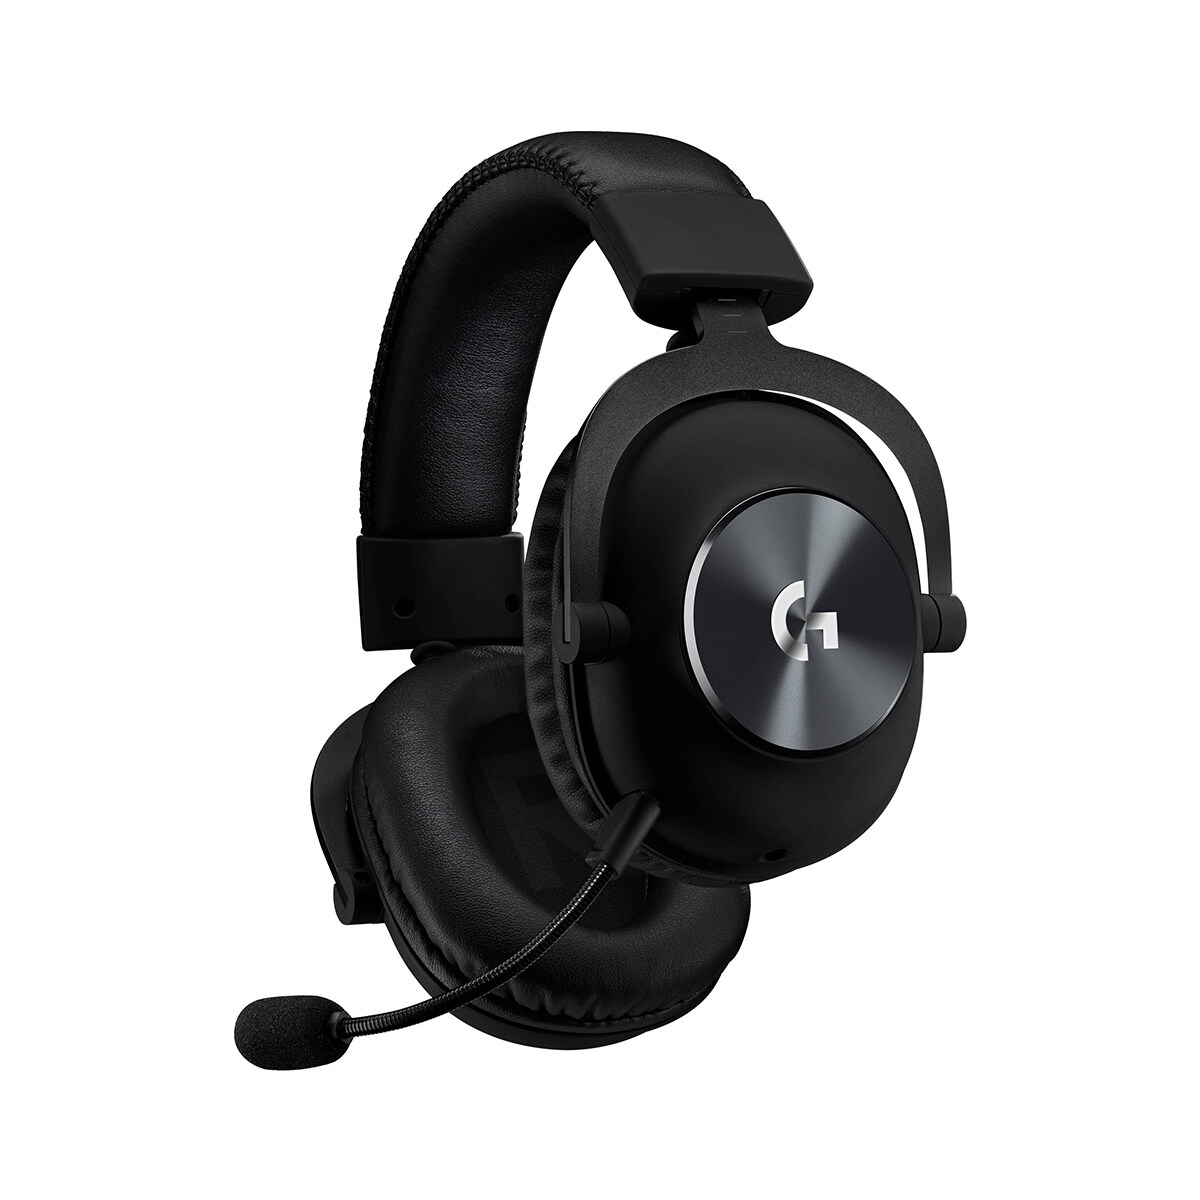 Logitech G PRO X 7.1 (981-000820) Gaming Headset With Blue Voice, Memory Foam, Durable Build